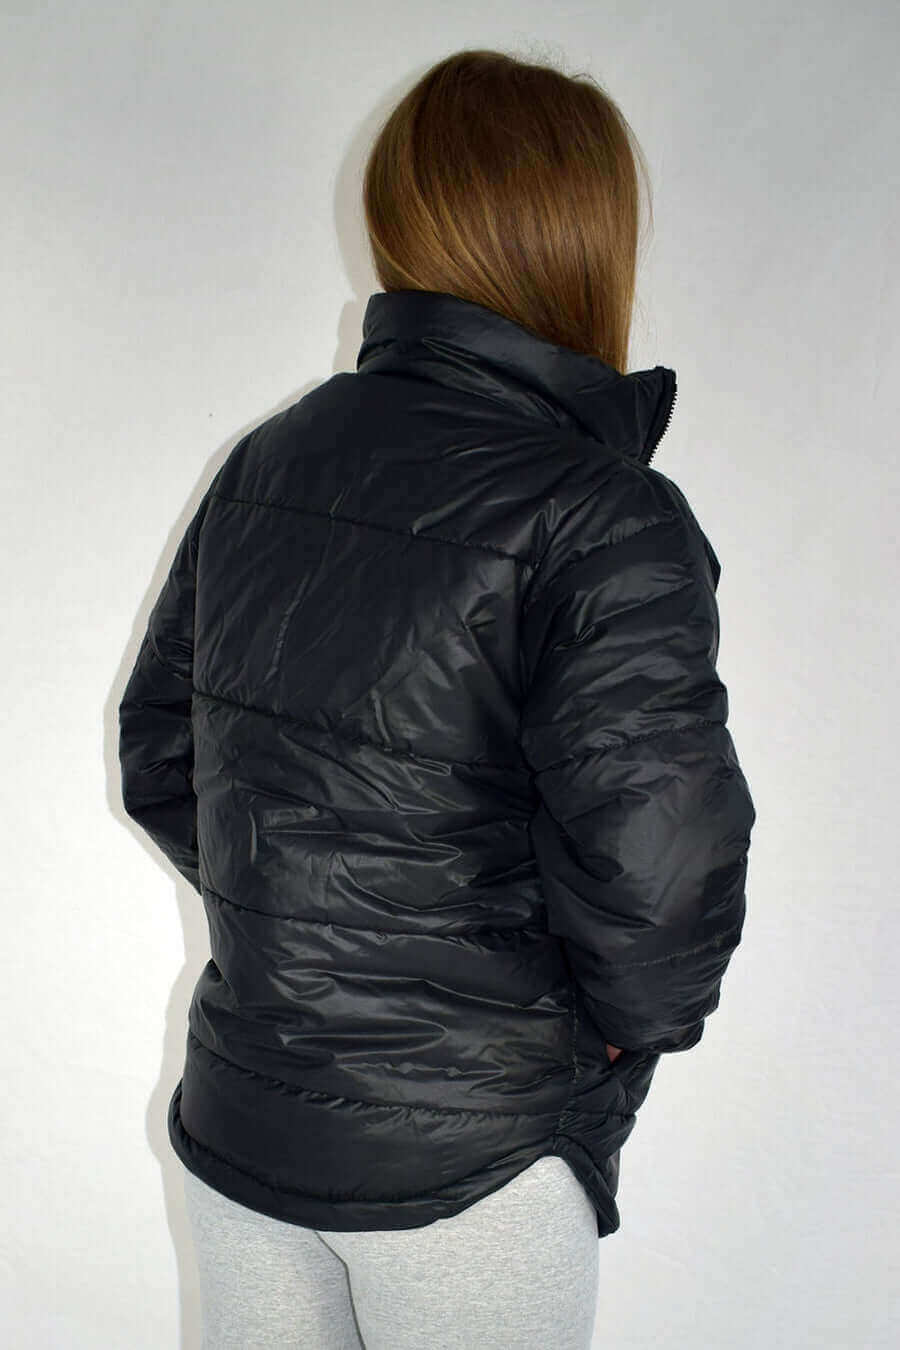 Back View of Zipped Black Puffer Jacket for Womens